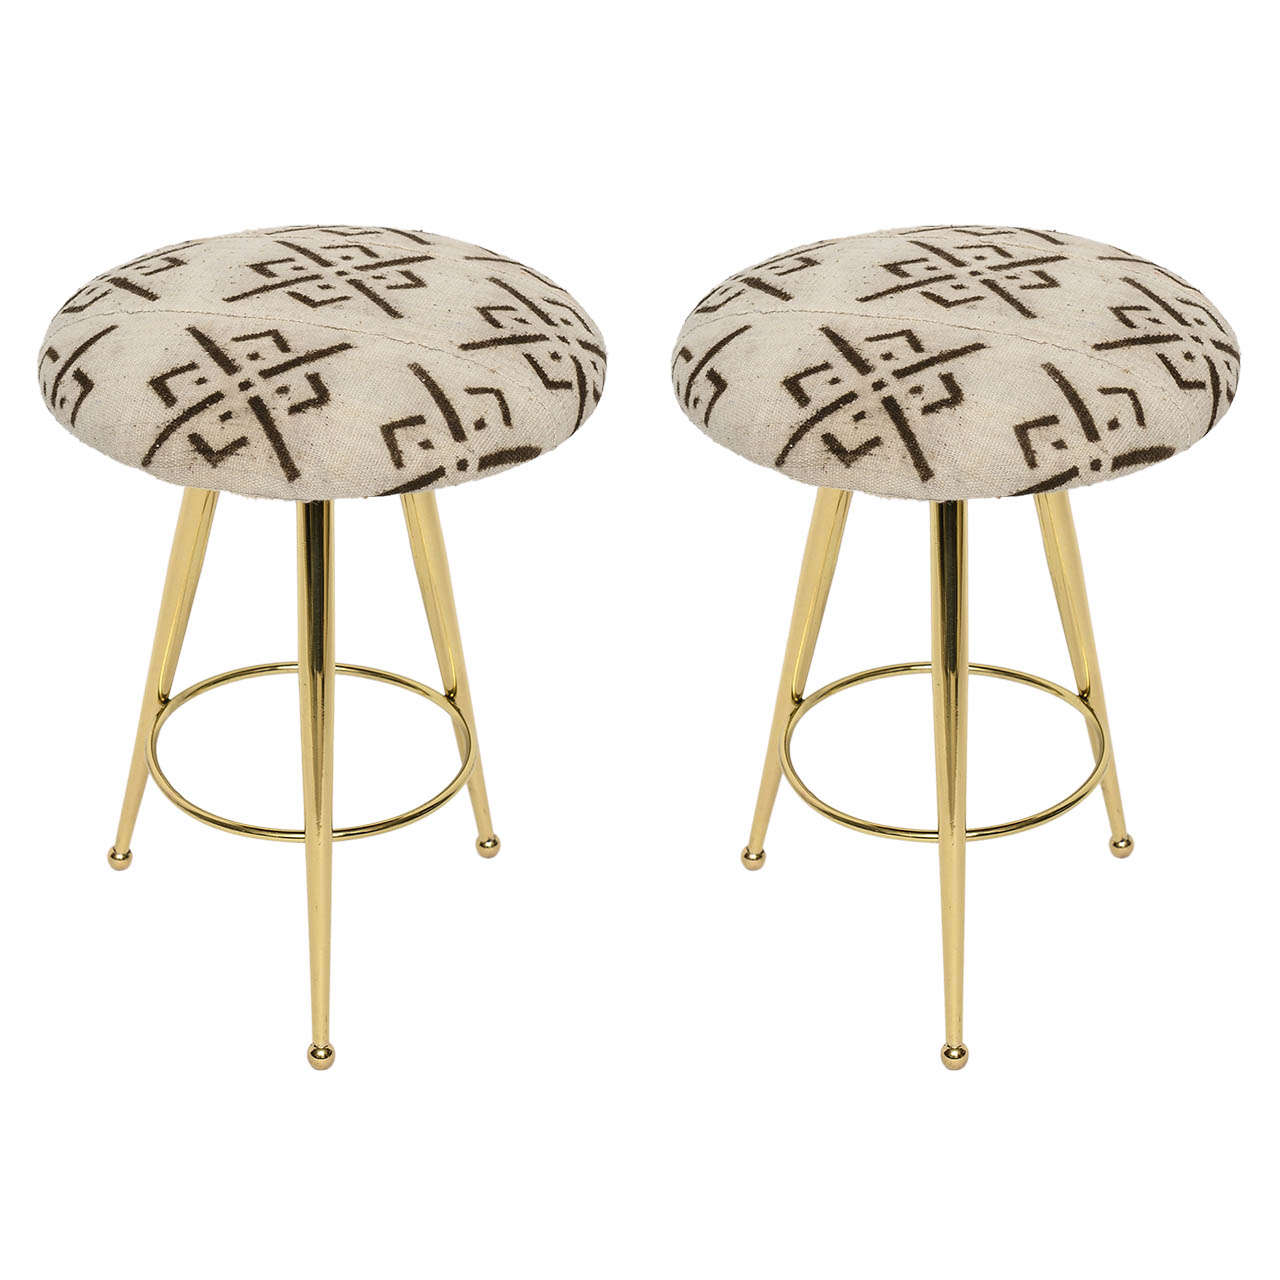 Pair of 50's Italian Brass Stools with Vintage Mud Cloth Upholstery